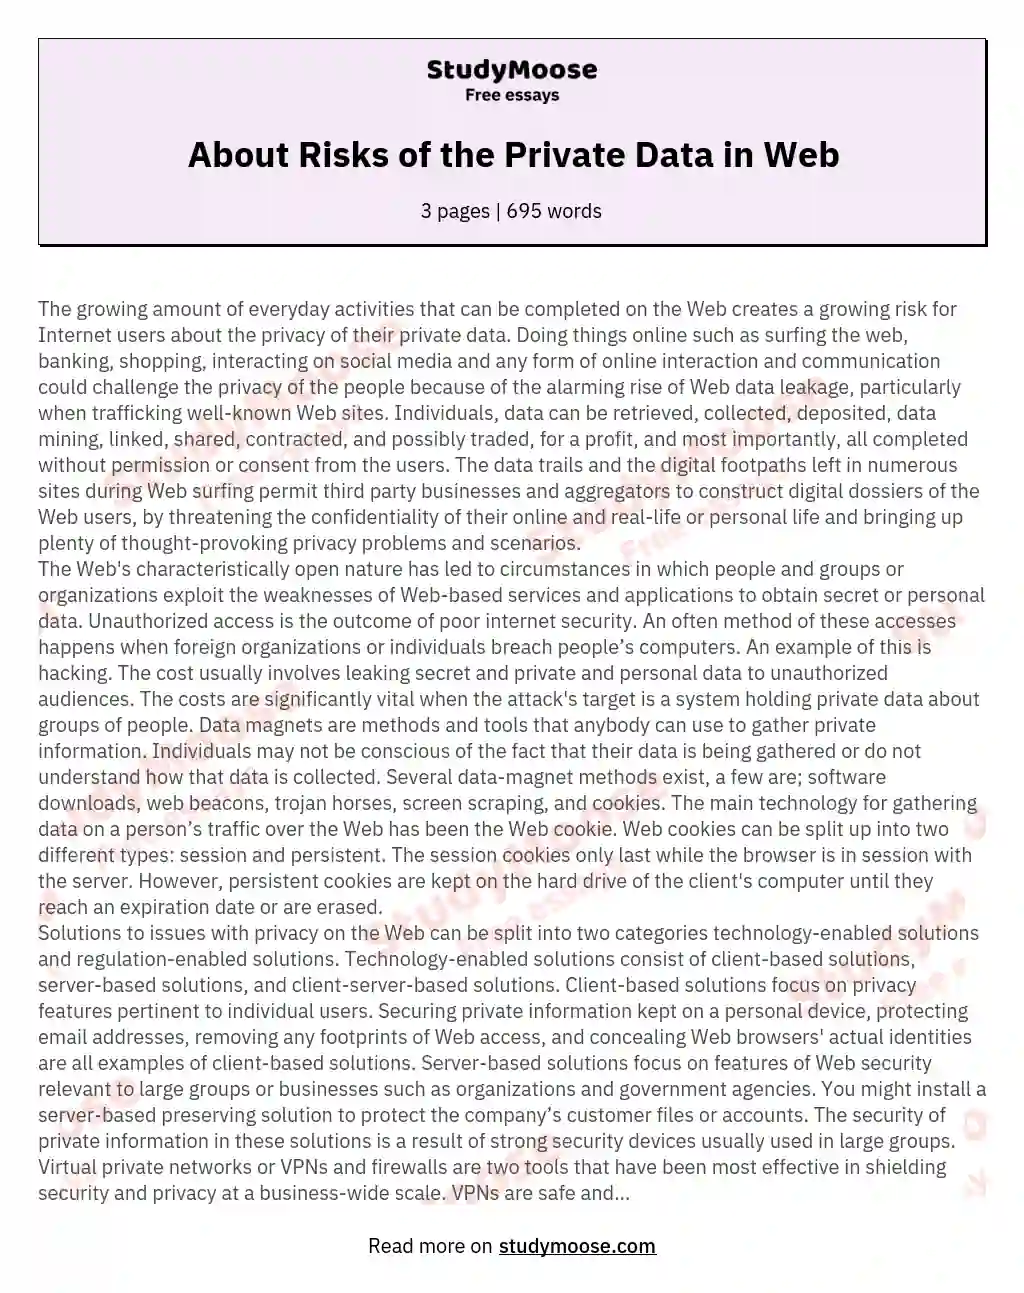 About Risks of the Private Data in Web essay